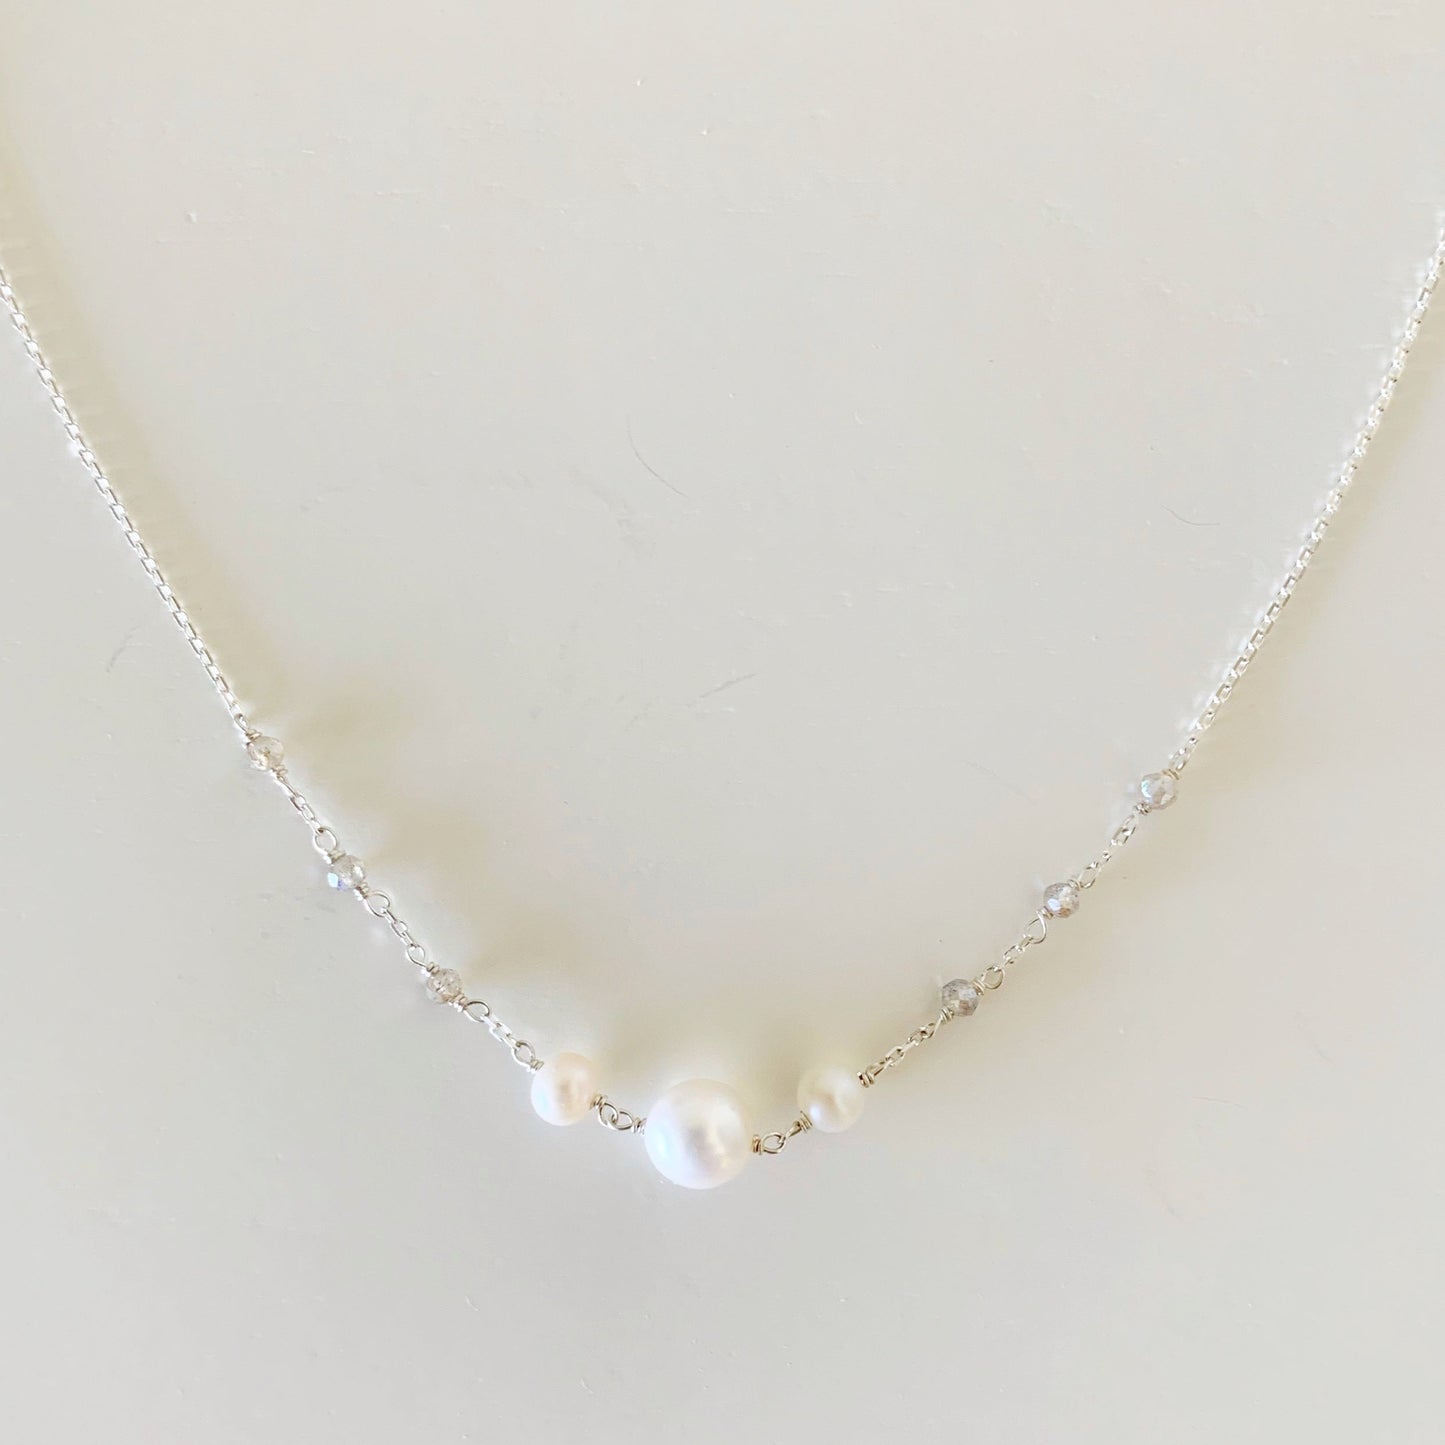 the westport necklace by mermaids and madeleines is created with sterling silver chain with hand wrapped freshwater pearls at the center and labradorite gems on the chain. this necklace is photographed closer up on a white surface